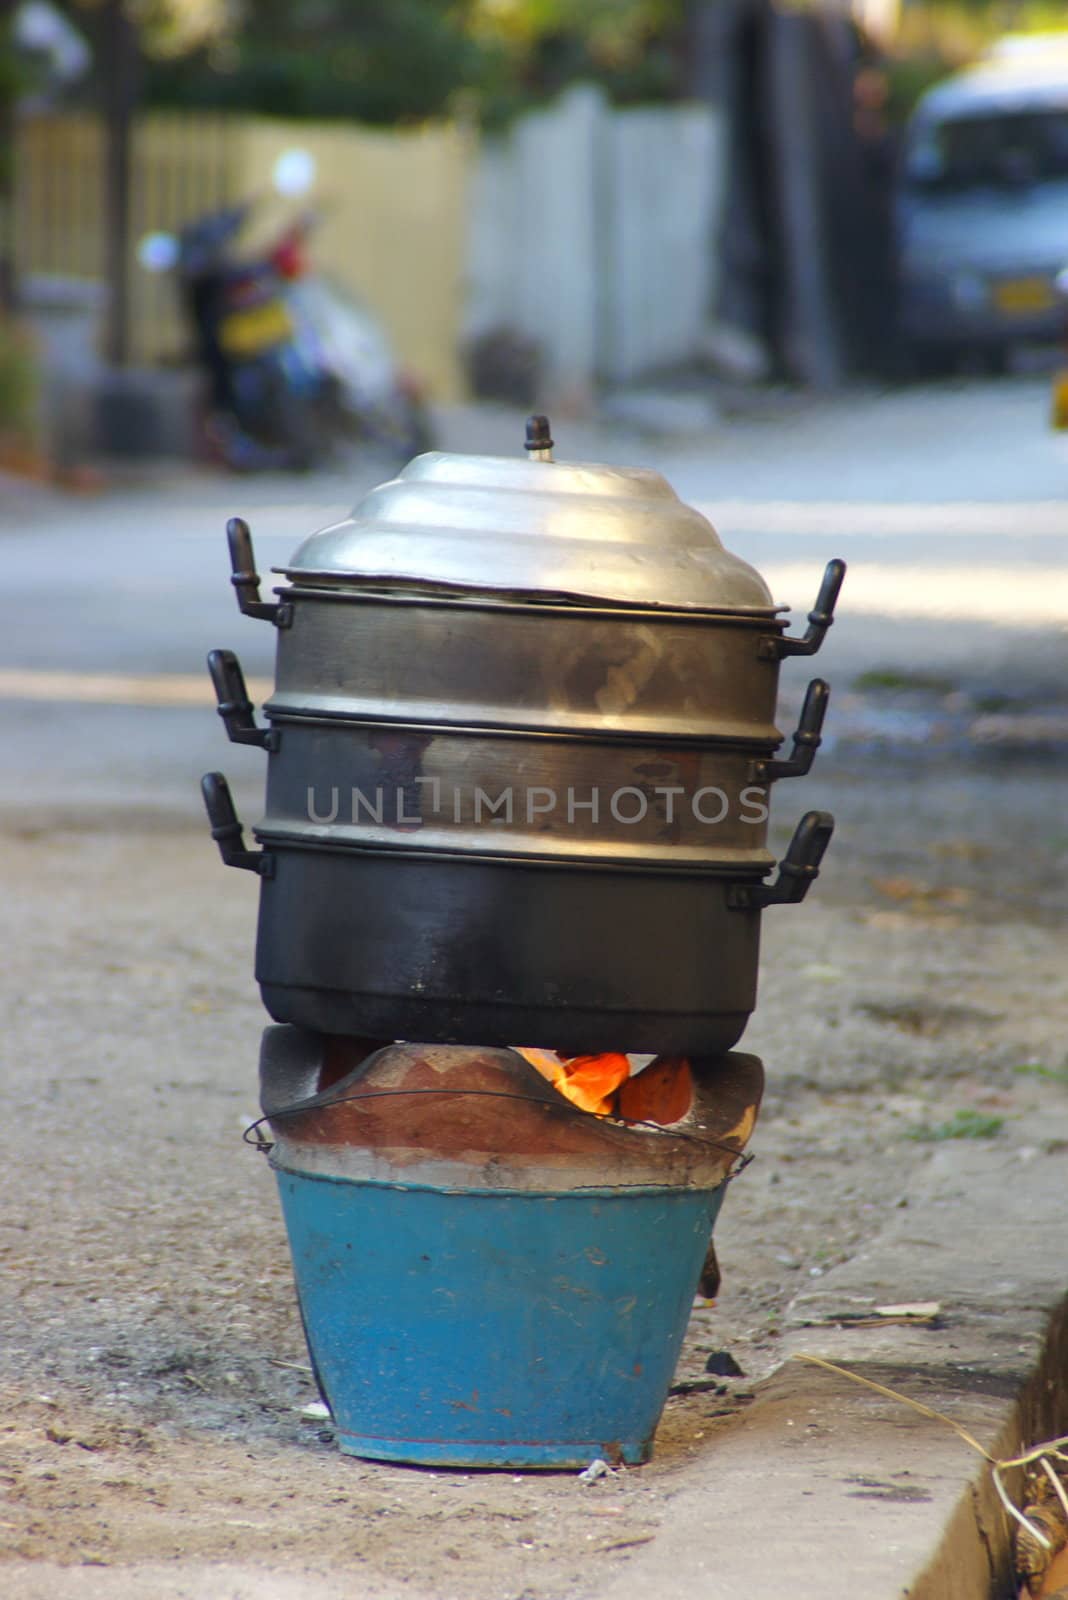 Cooking pot on a street in asia